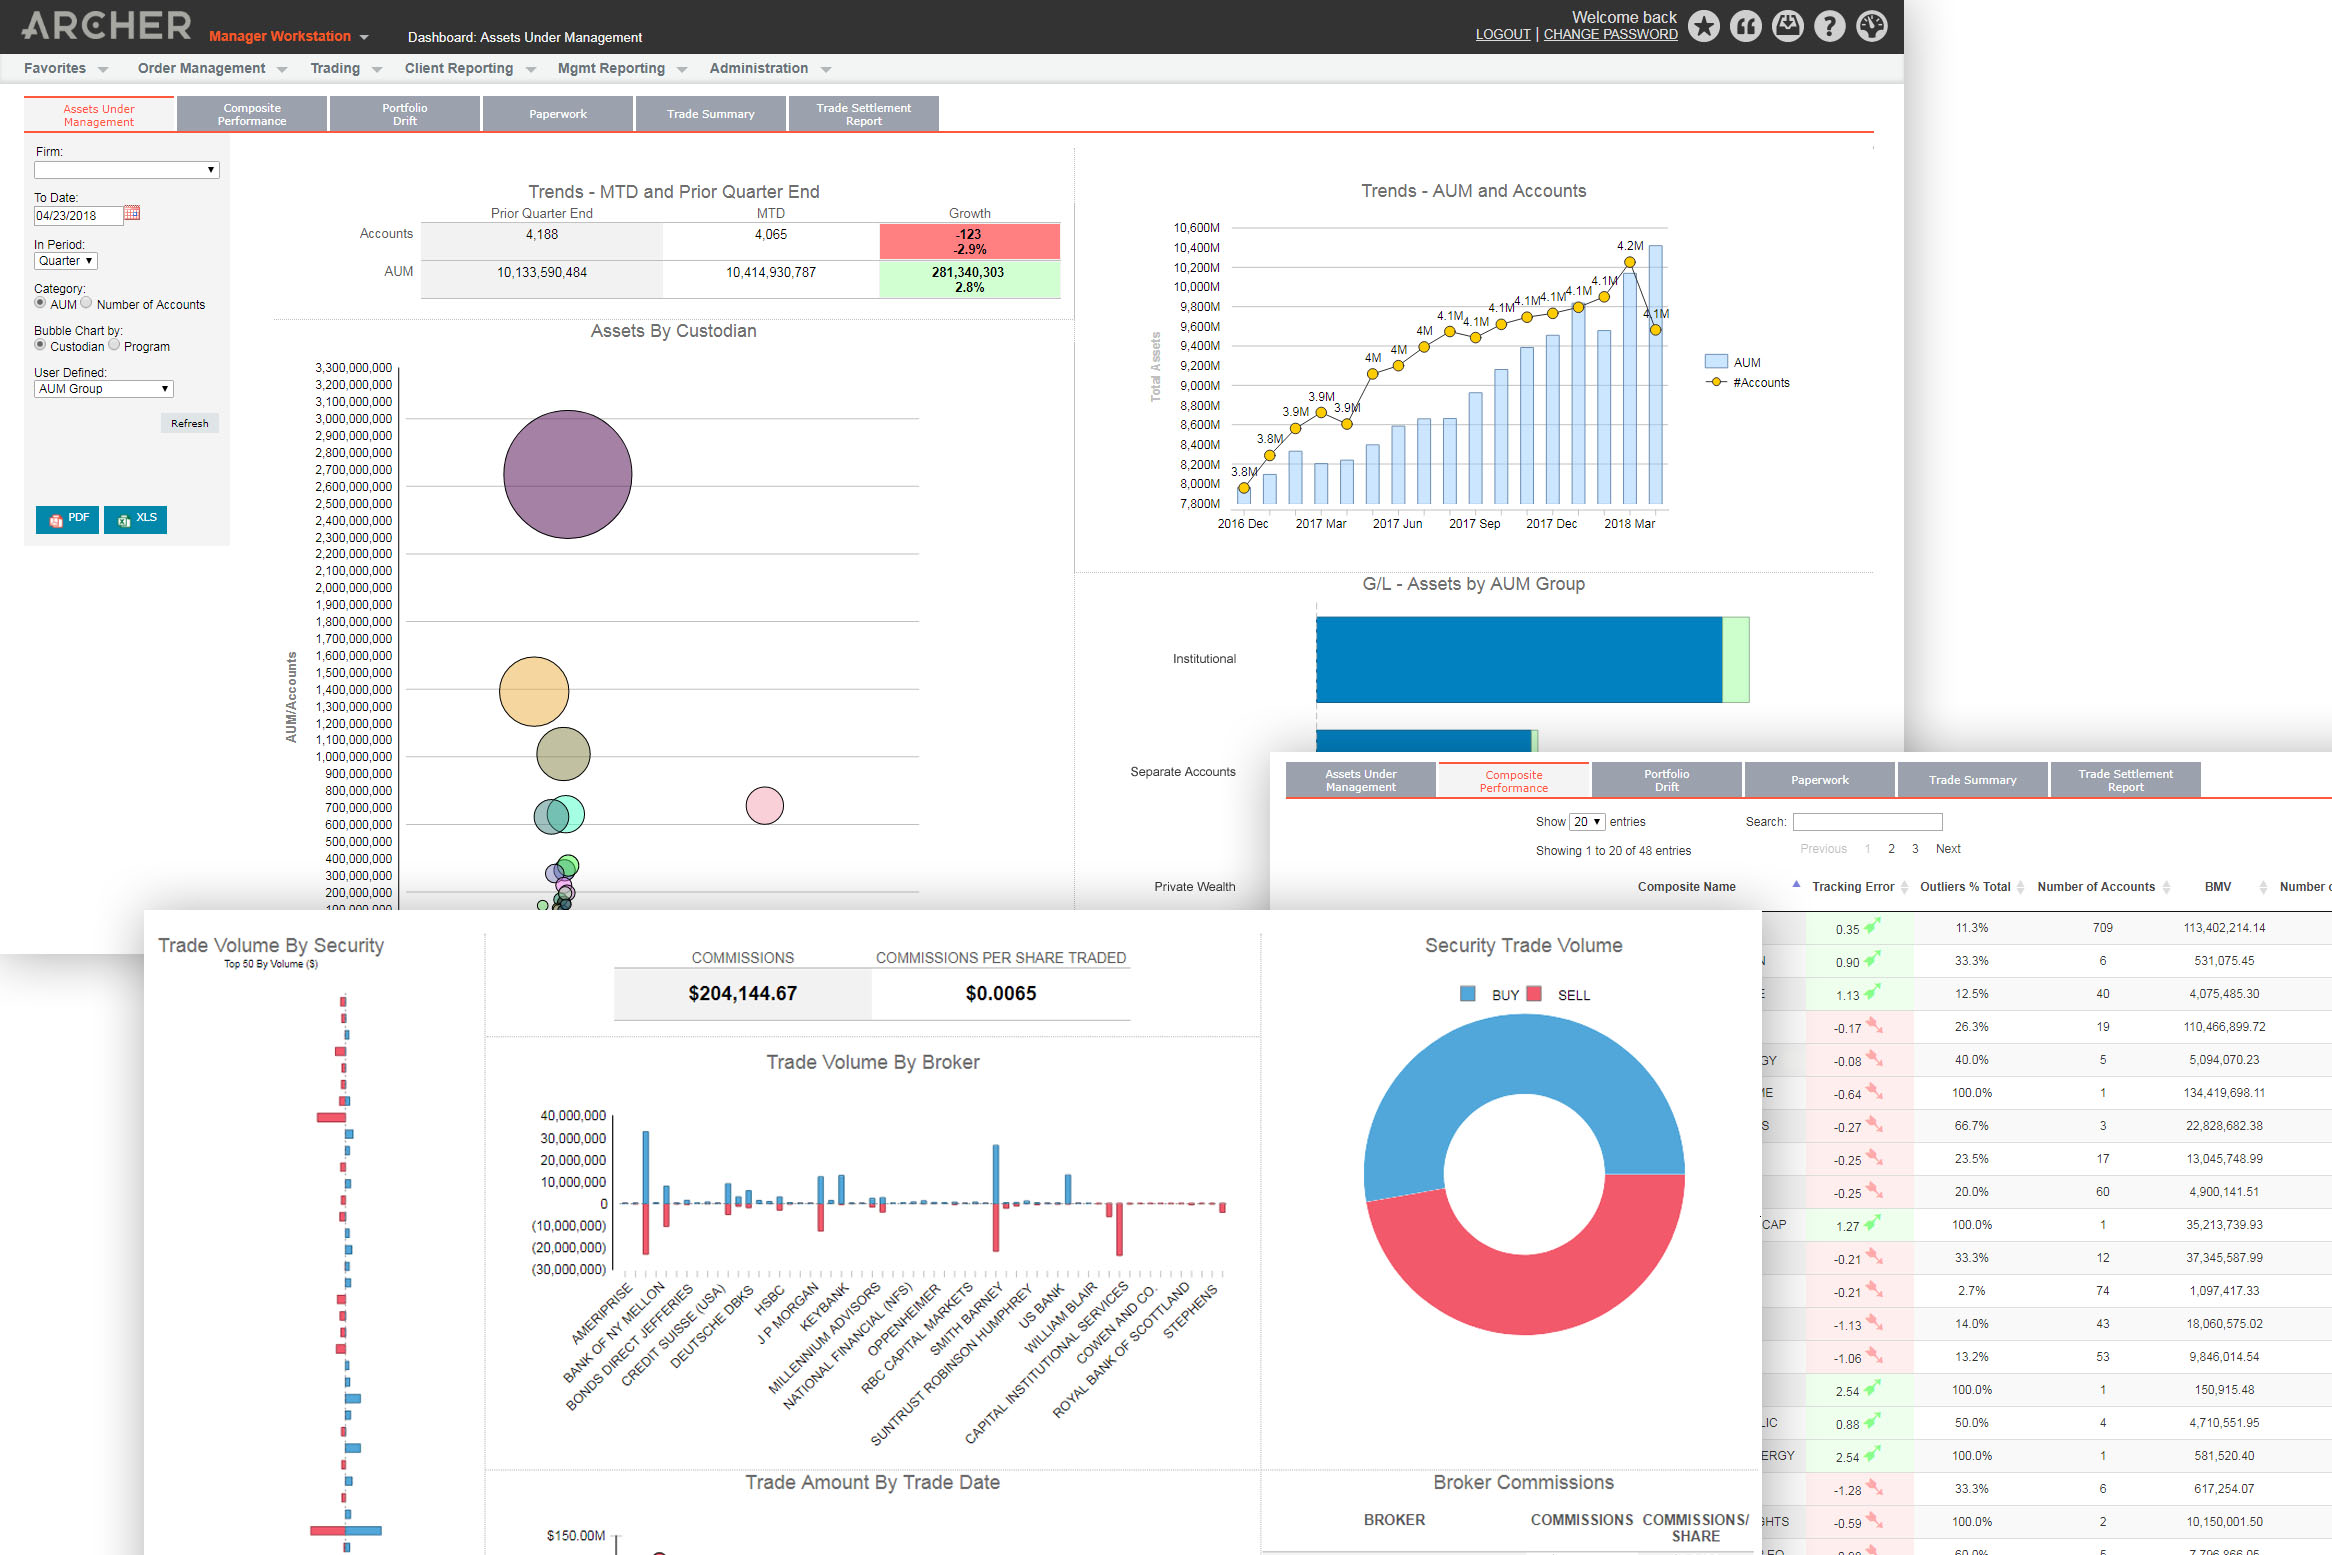 Multiple charts showing Archer's Business Intelligence Dashboards